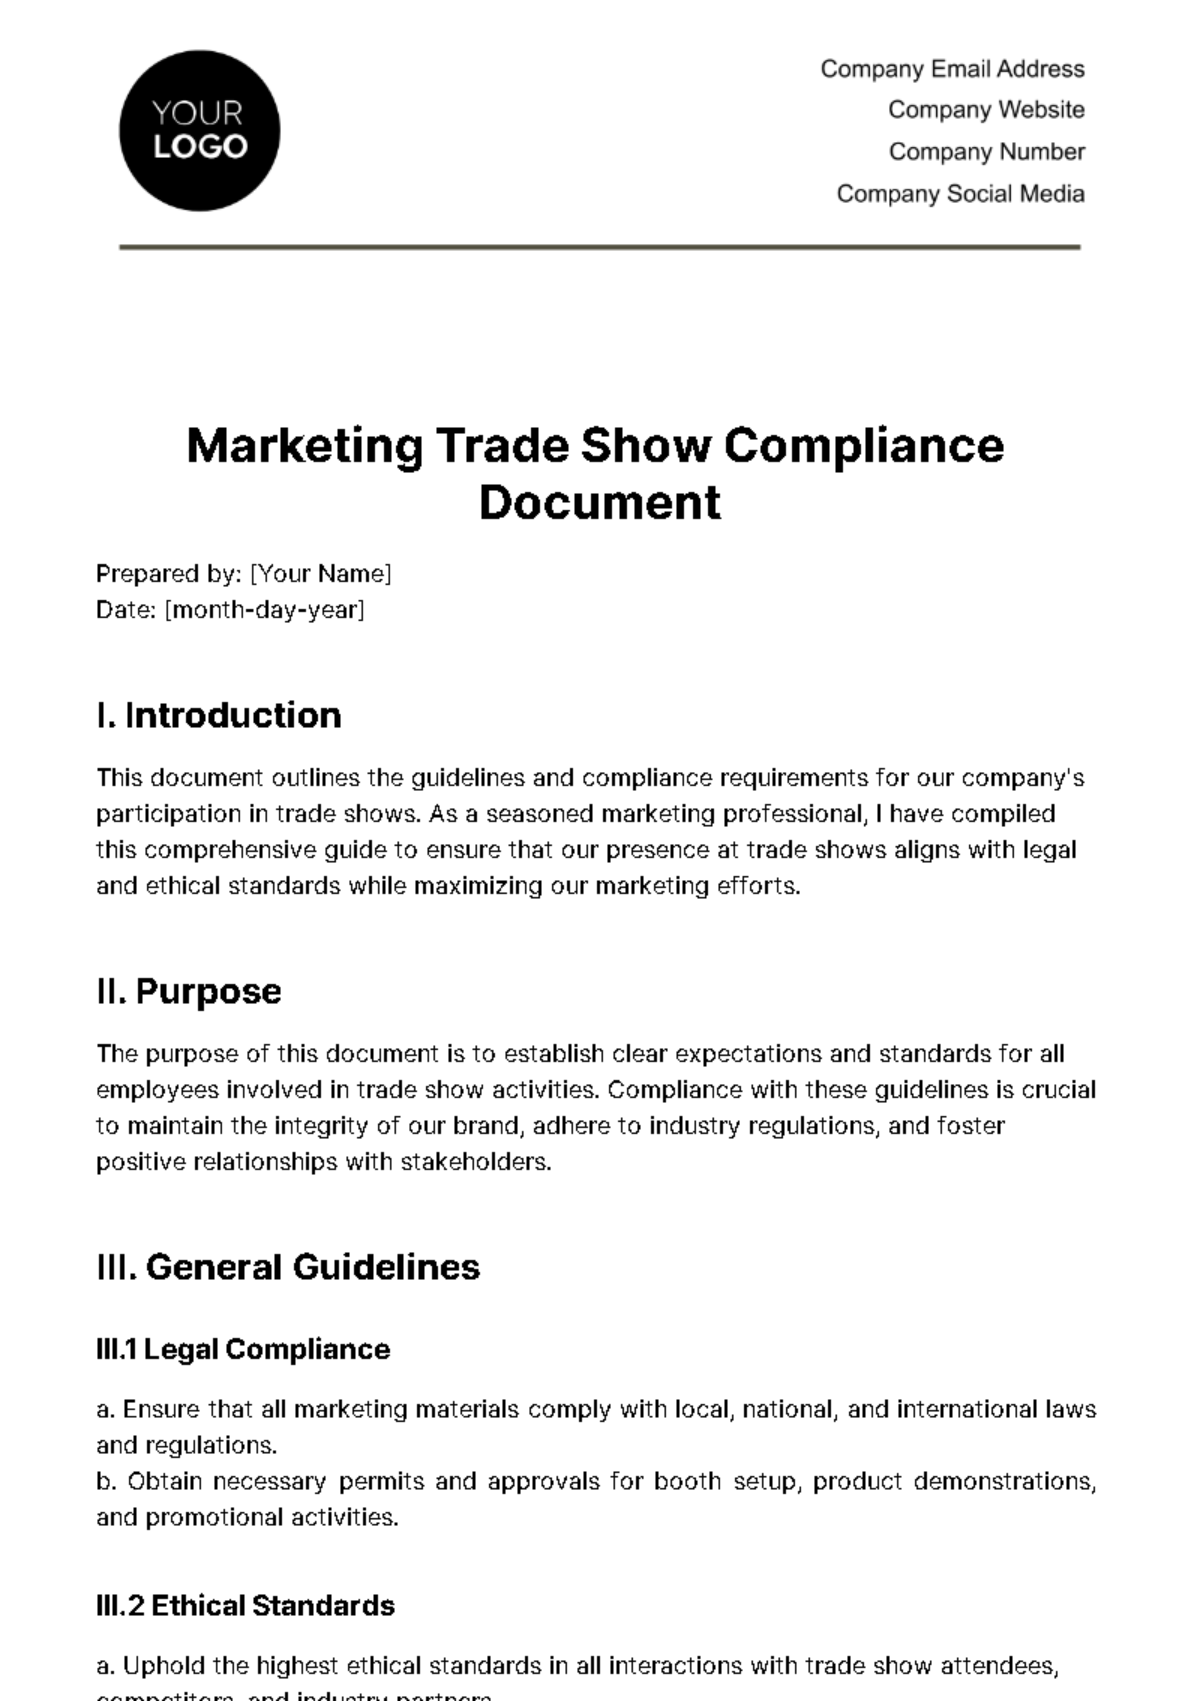 Free Marketing Trade Show Compliance Document Template